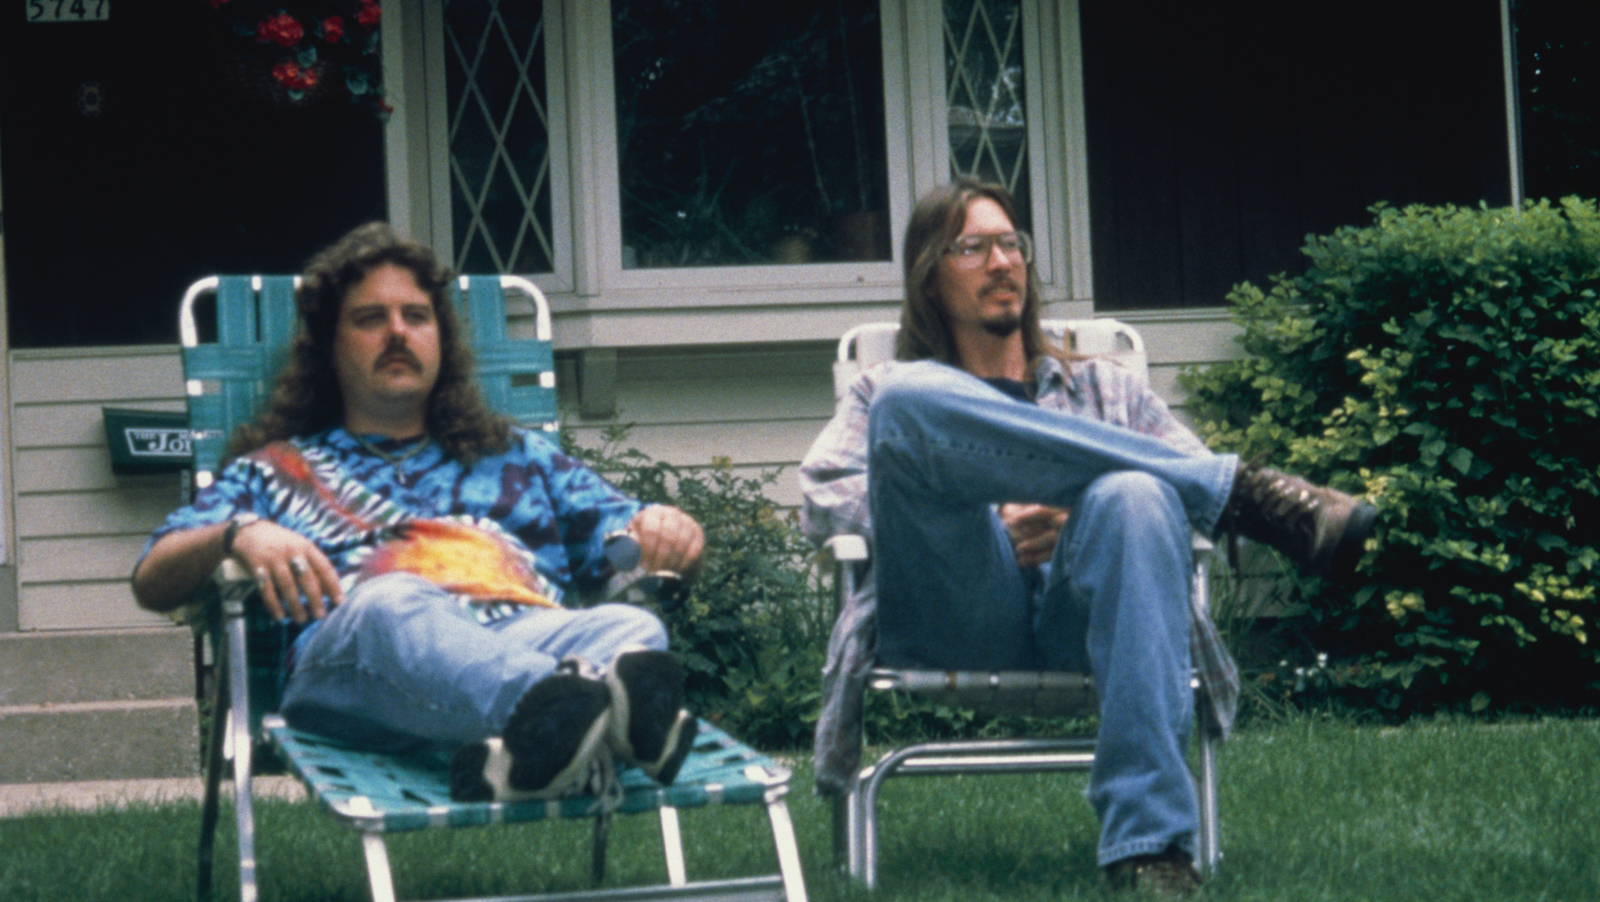 A young man with long hair and glasses and another man with long hair sit on lawn chairs